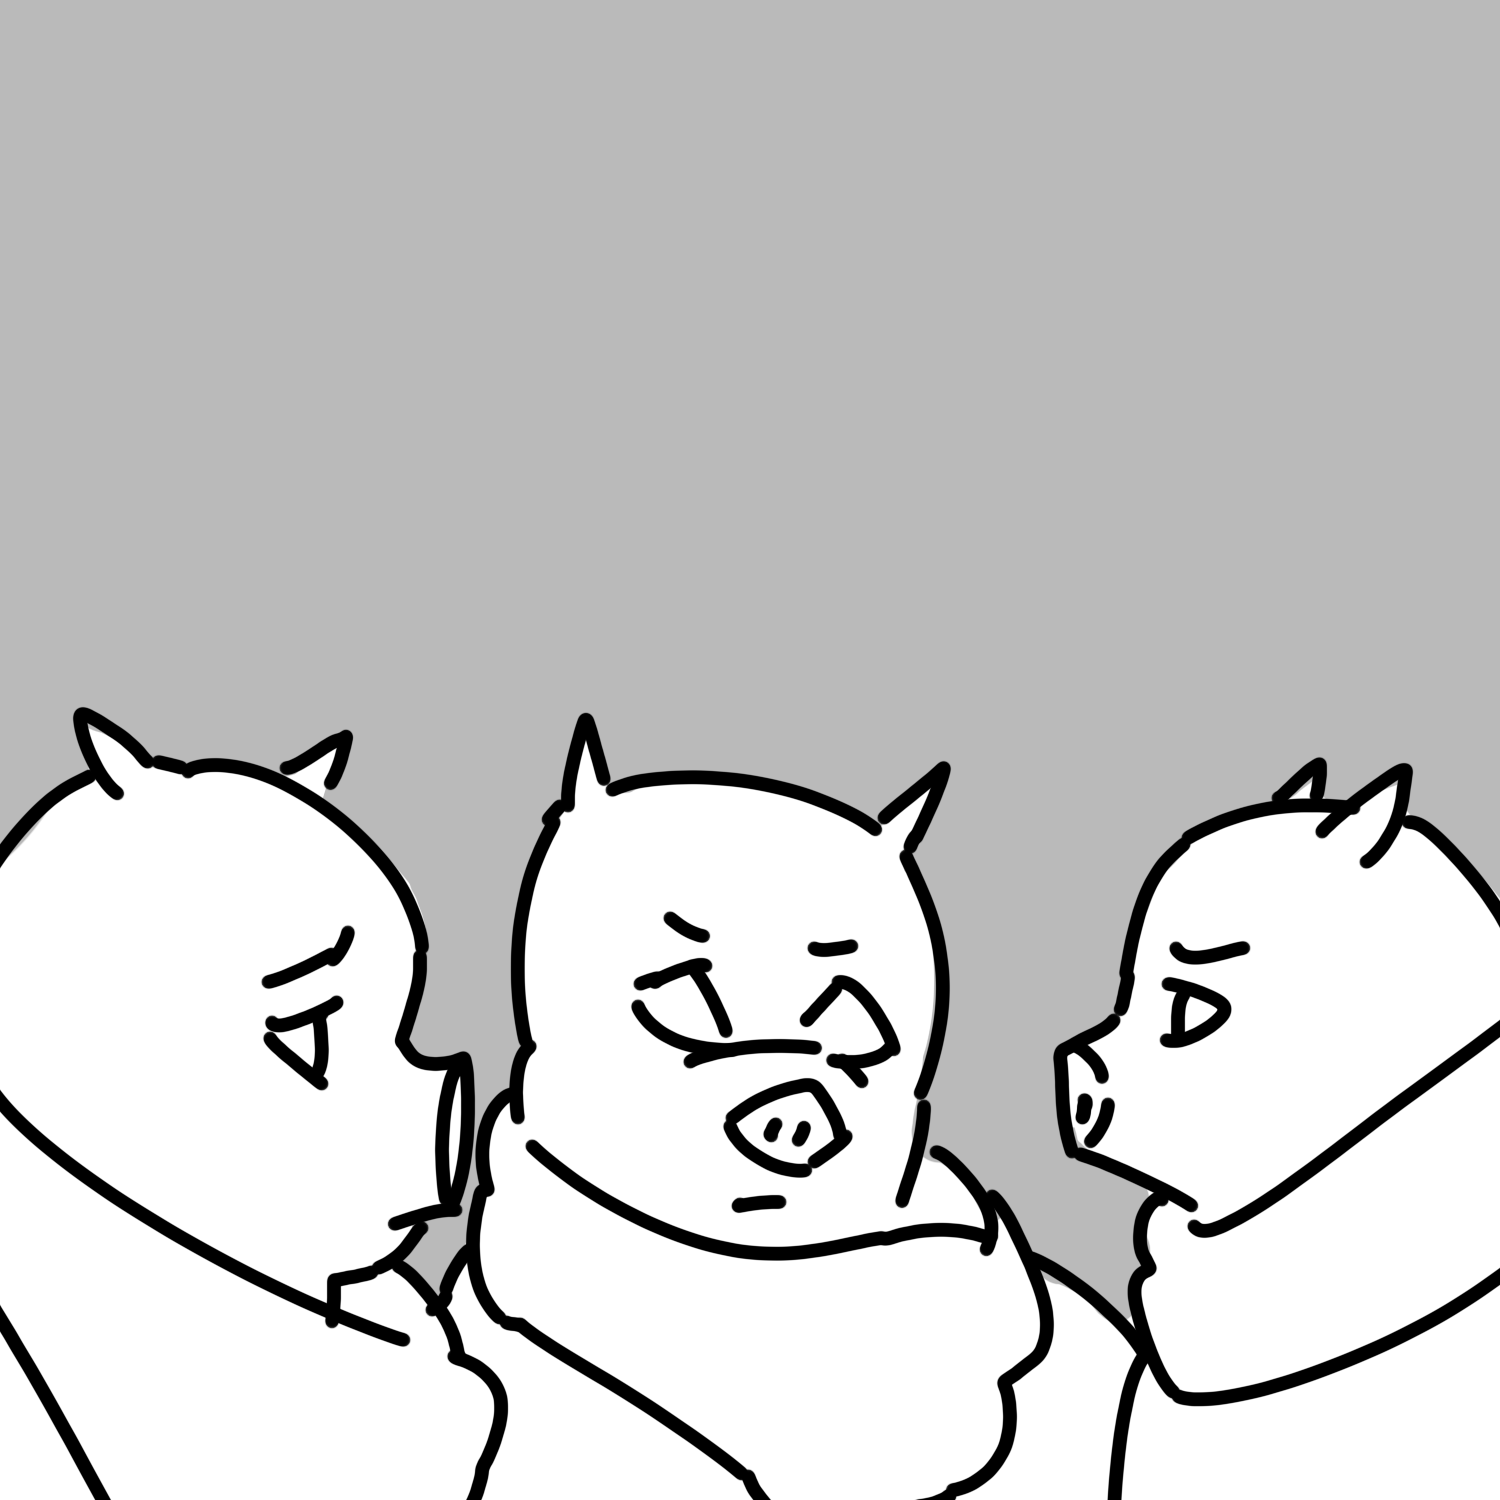 In a black and white outline style. Three pigs in loose garbs stand among each other in front of a grey background.